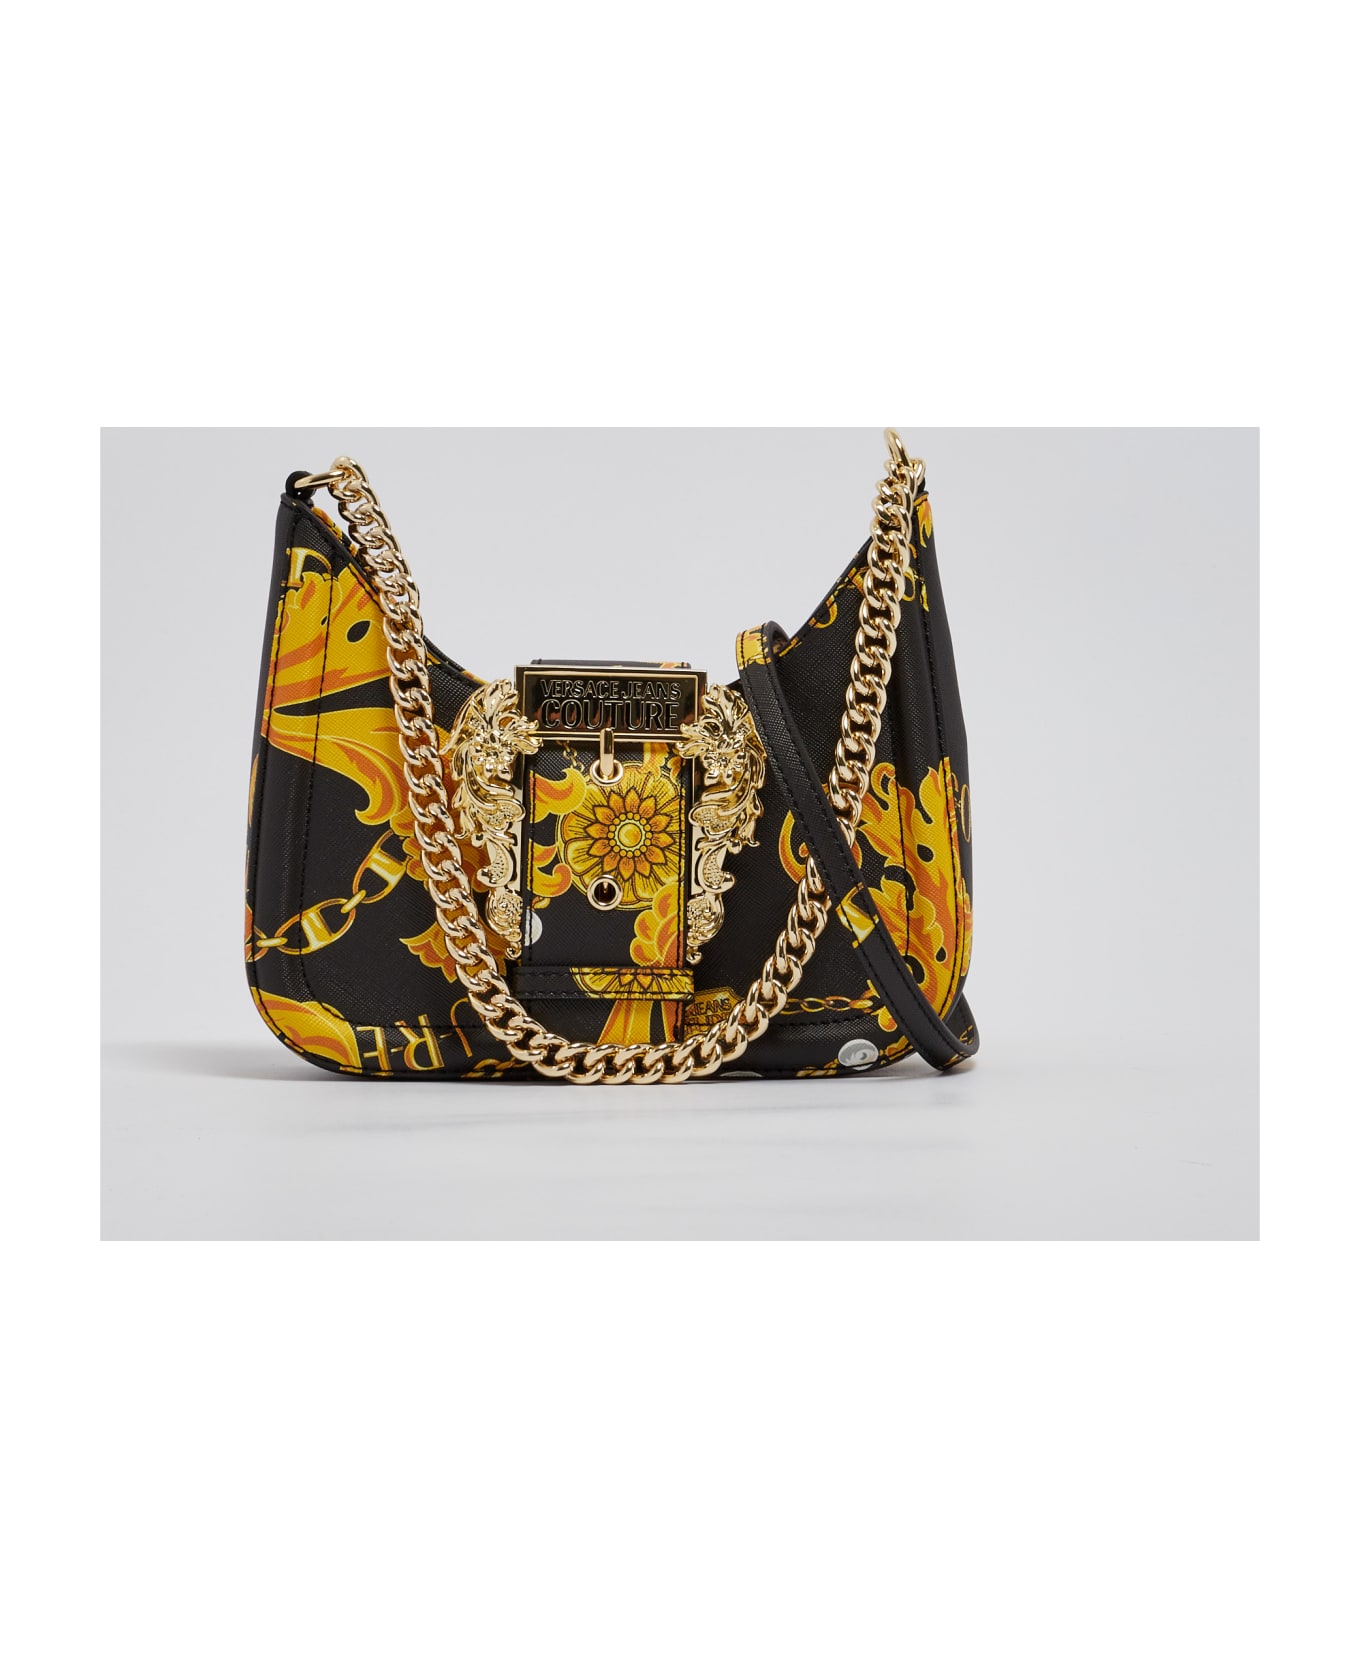 Versace Jeans Couture Chain Couture Hobo Bag - NERO-ORO トートバッグ